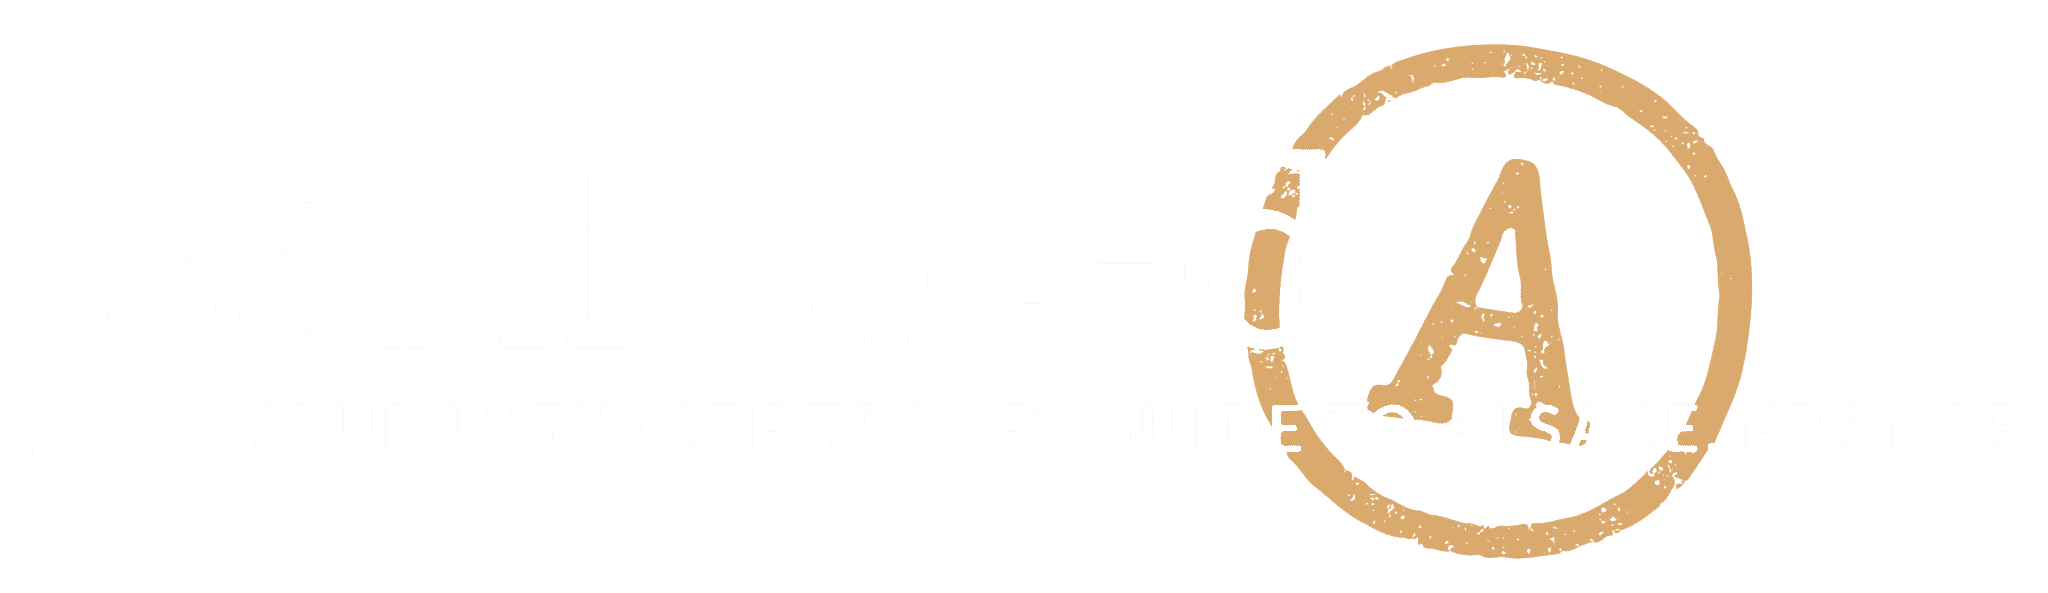 getalsaced.com the ultimate travel guide to alsace france